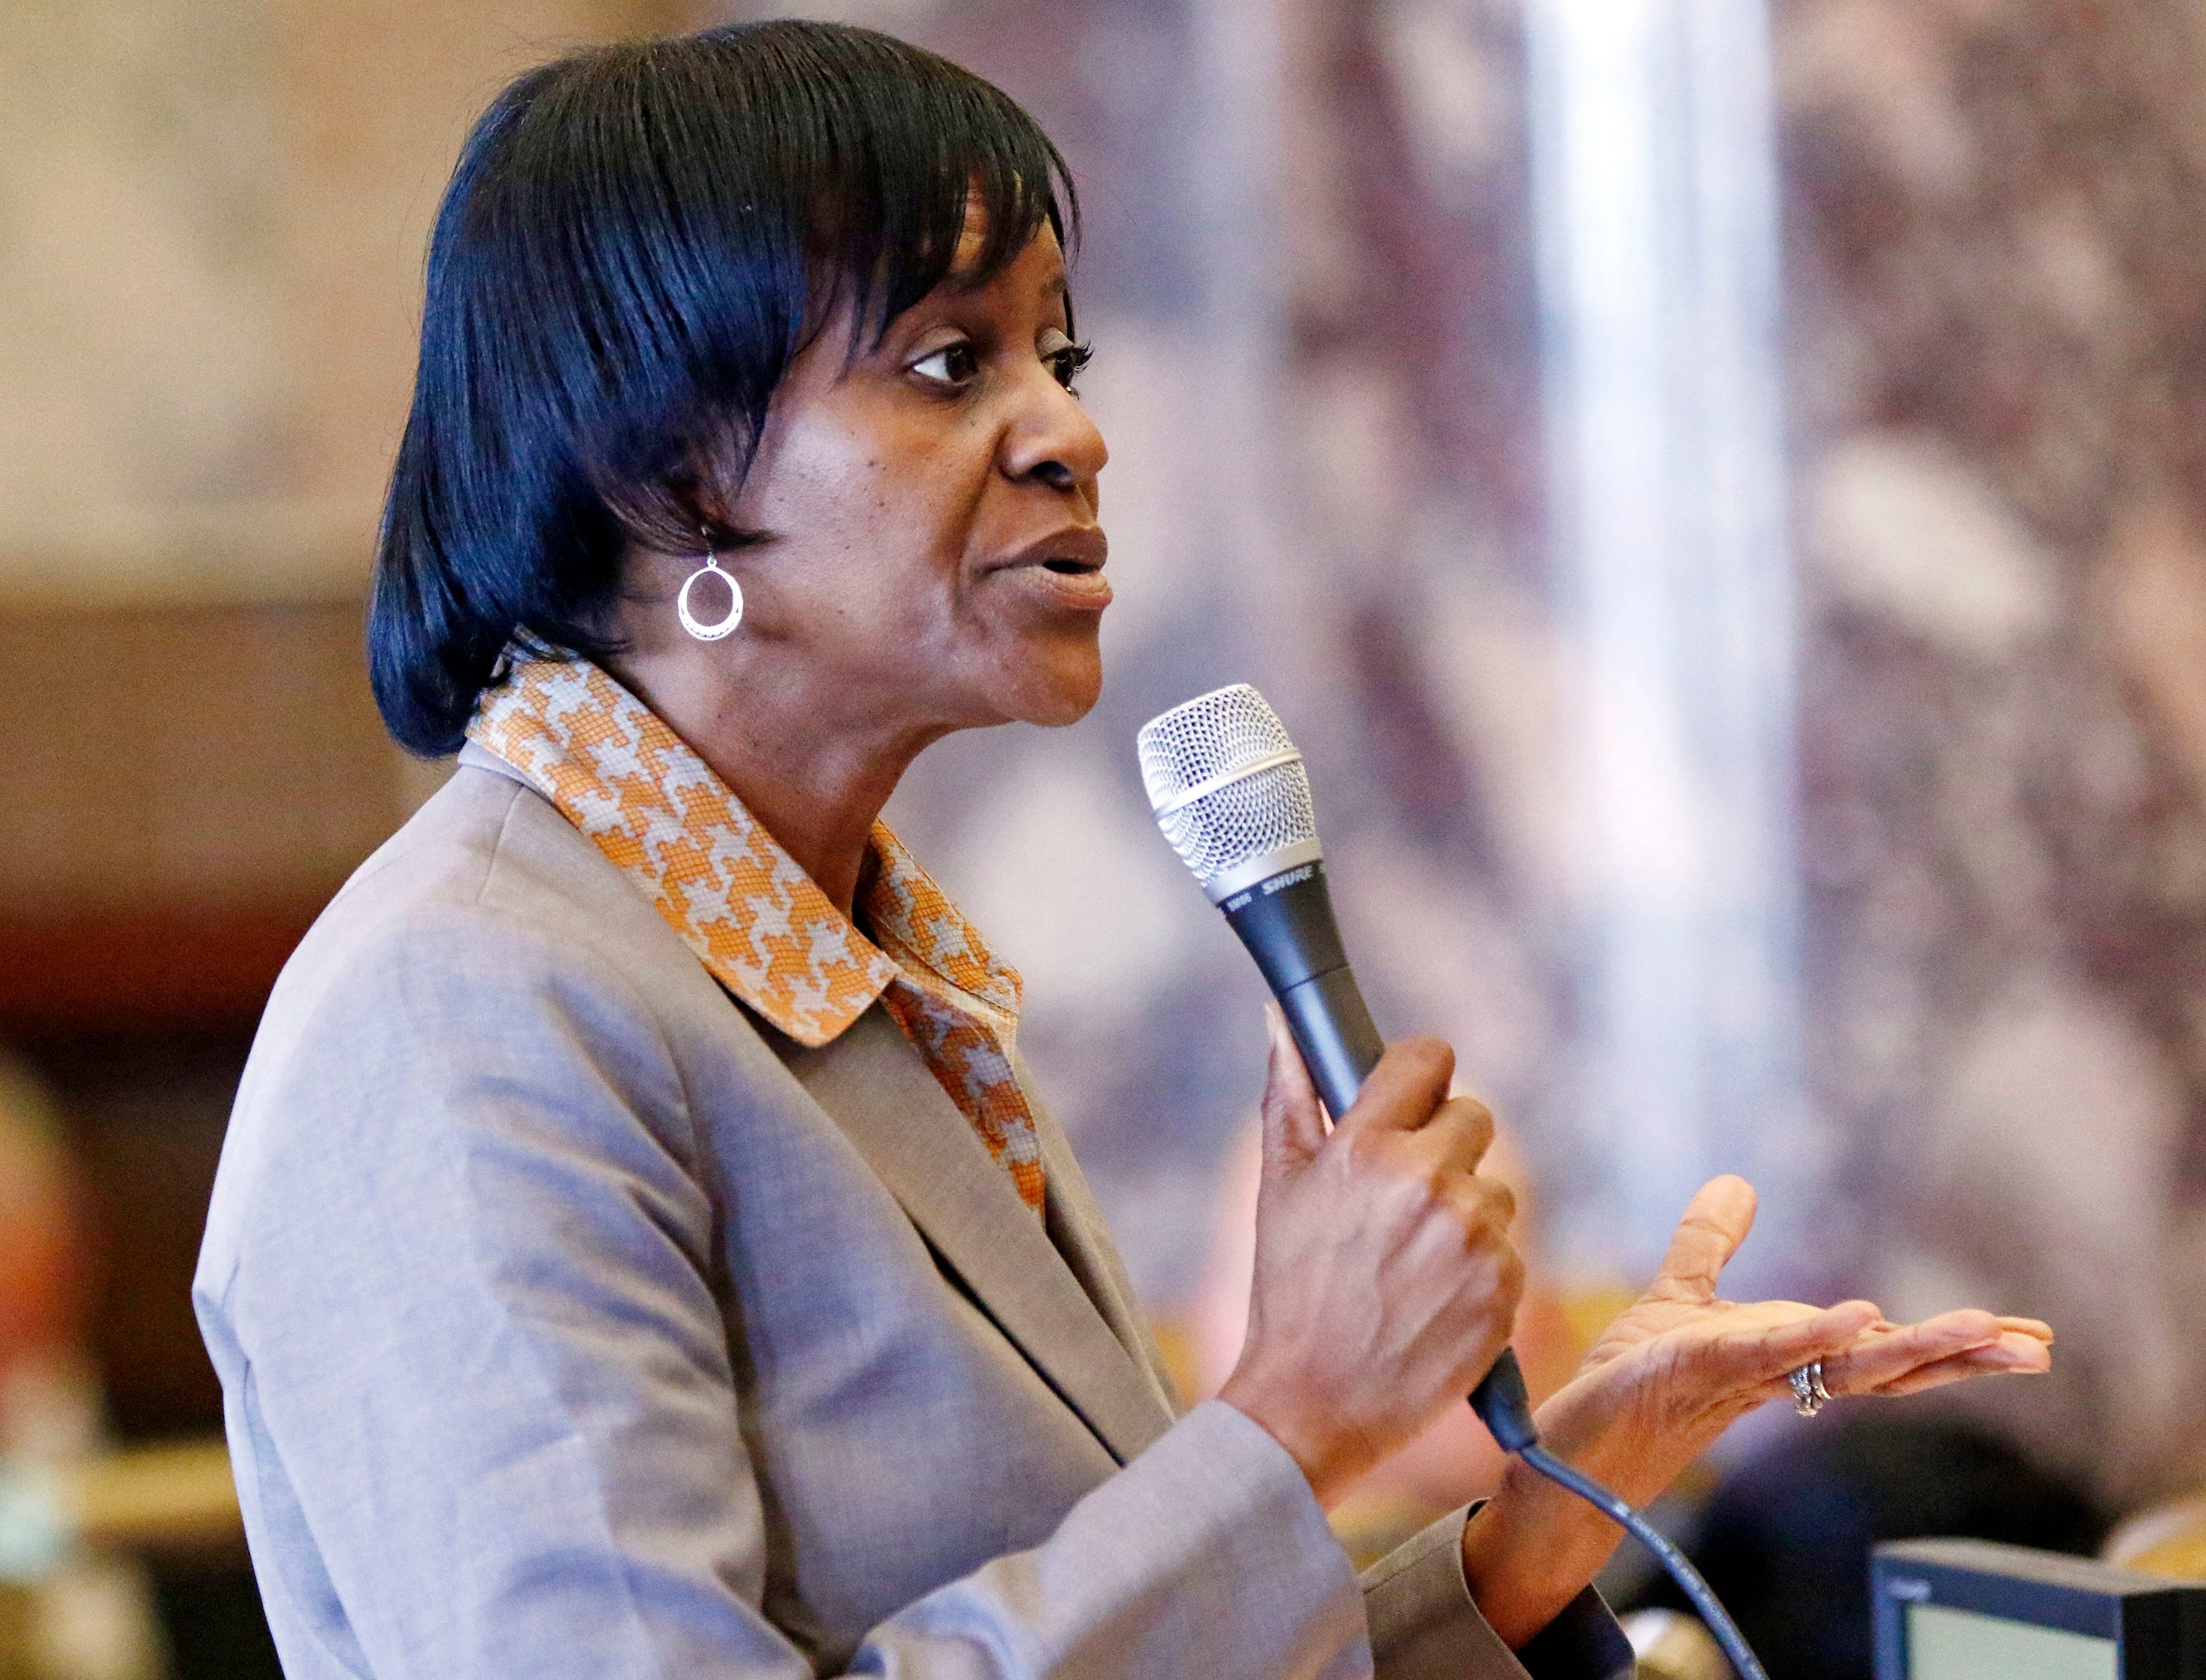 Sen. Tammy Felder Witherspoon, D-Magnolia, during floor debate in Senate chambers at the Capitol in Jackson, Miss., in 2018.